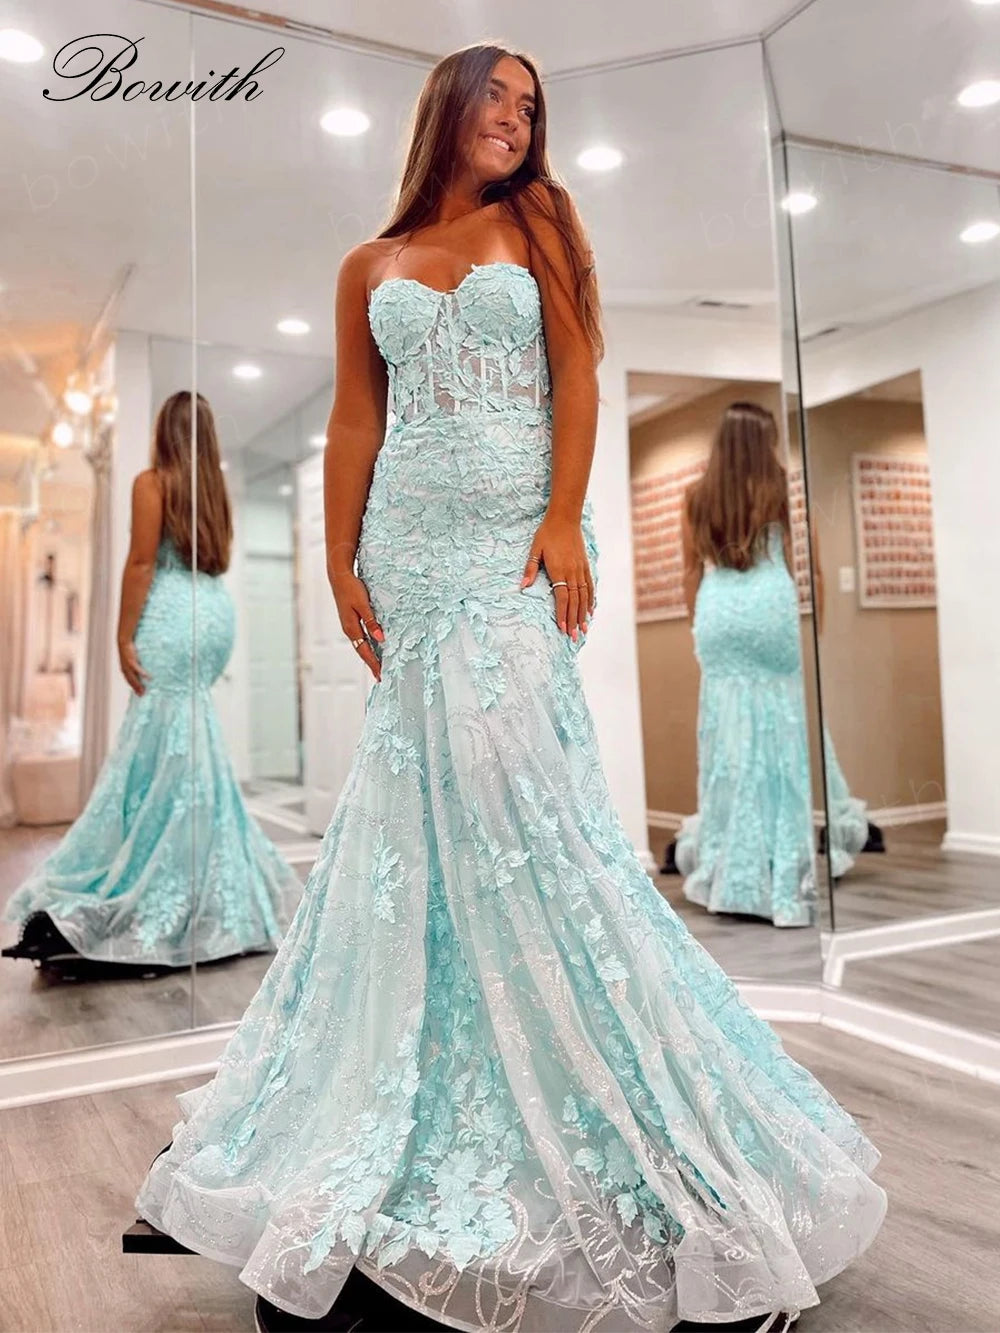 Bowith Strapless Dresses Applique Mermaid Homecoming Dresses Formal Evening Party Dresses for Elegant Celebrity Dress women prom